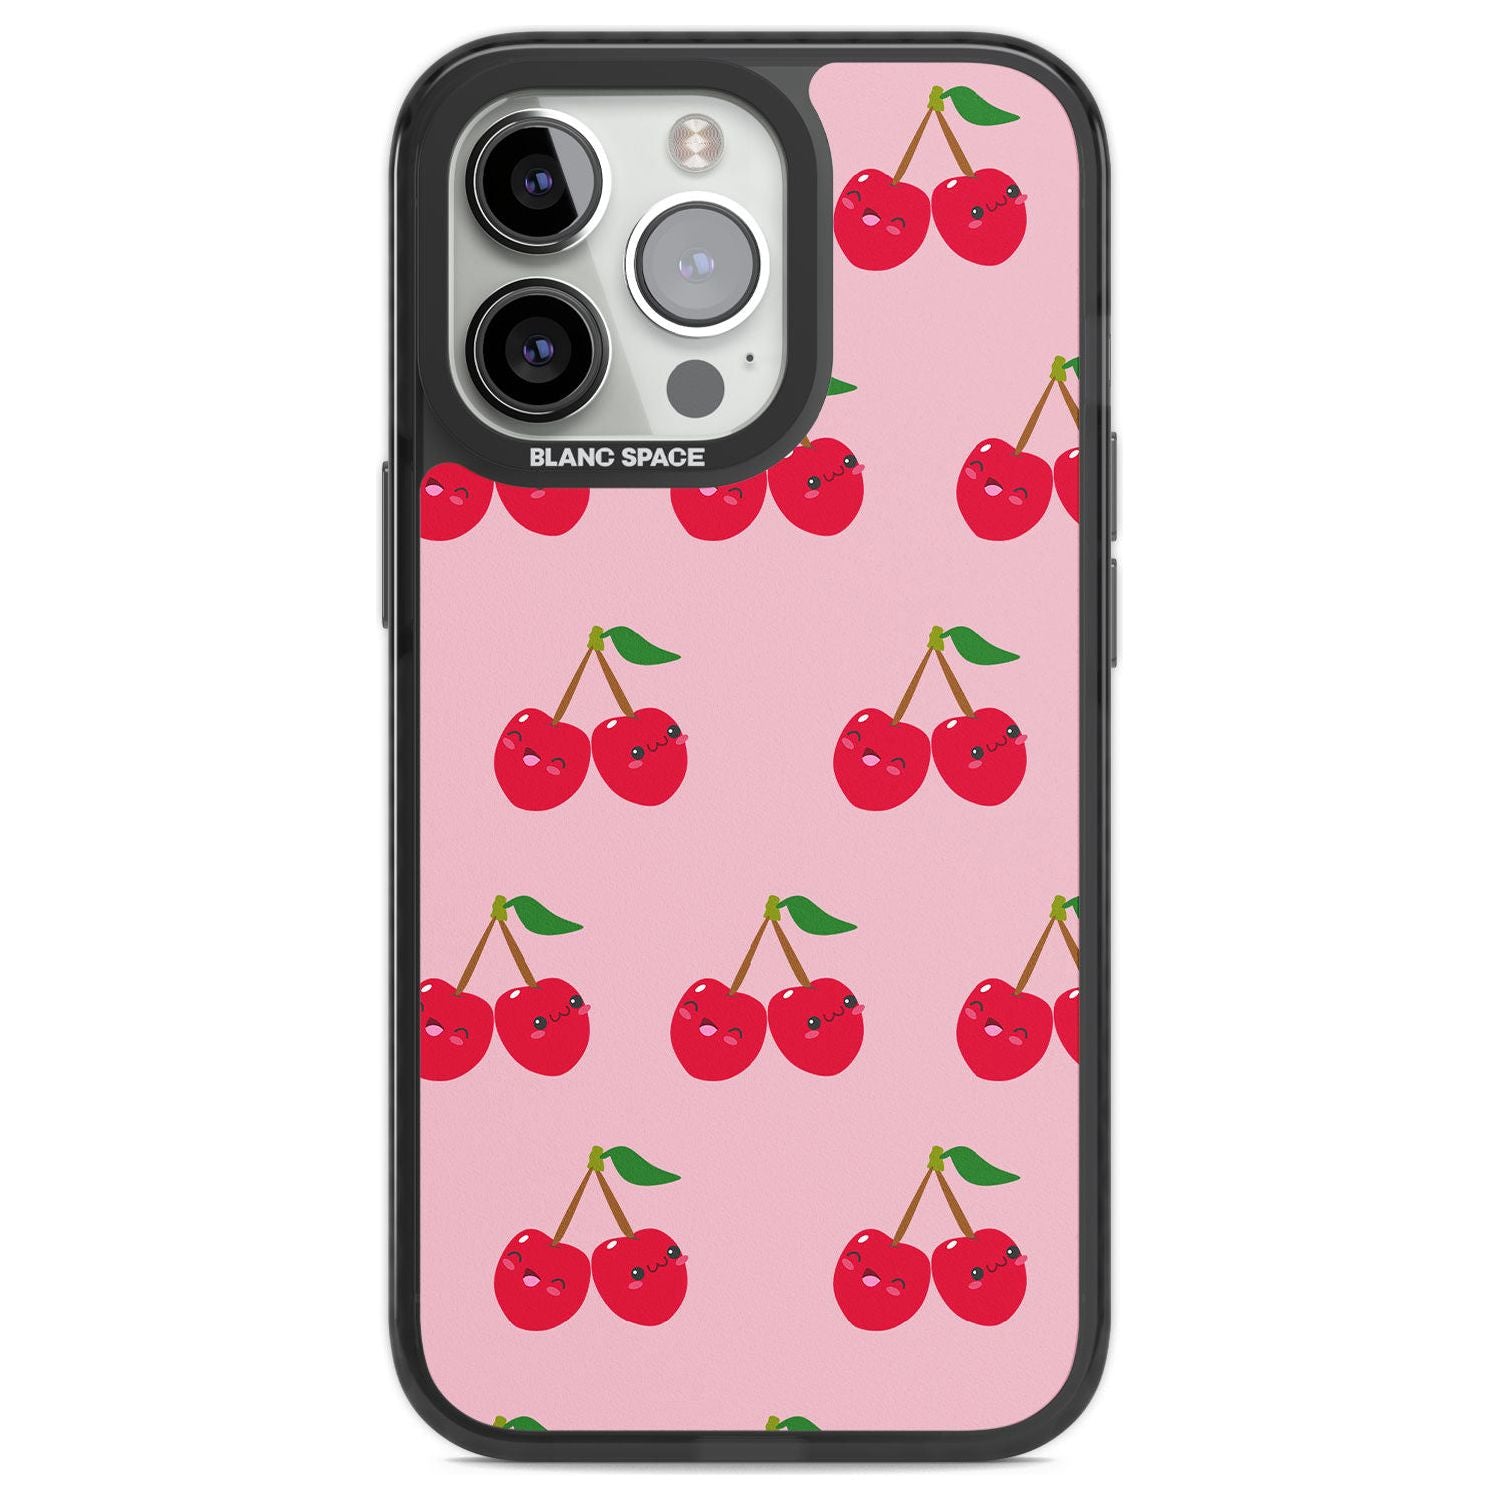 Cheeky Cherry Iphone Case Blanc Space 8026